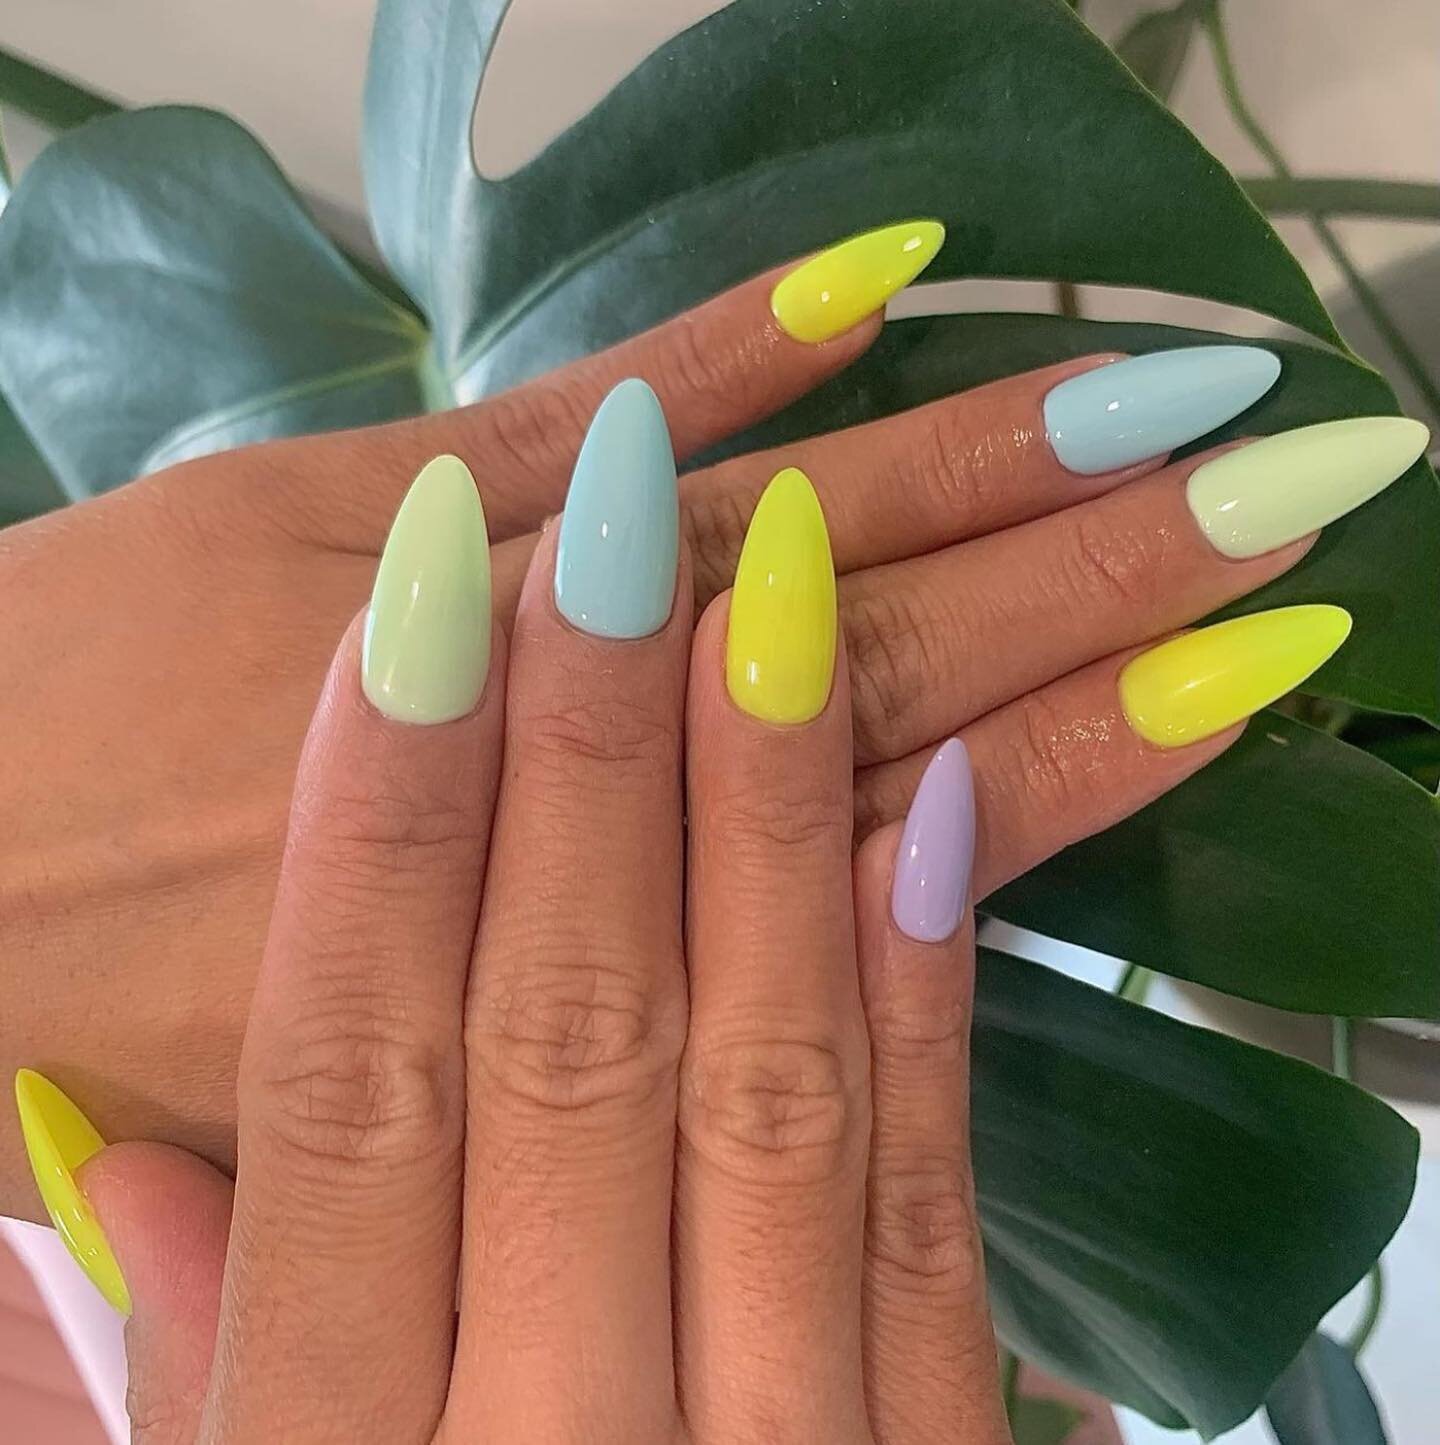 Happy Saturday NG fam, it's the last weekend of Spring!💛💚💜Click on link in bio to book your appts✨ #nailgarden #nails #spring #nailart #june #love #sunshine #sun #beautiful #beauty #spaday #mani #manicure #pretty #gelnails #franchise #nailfranchis